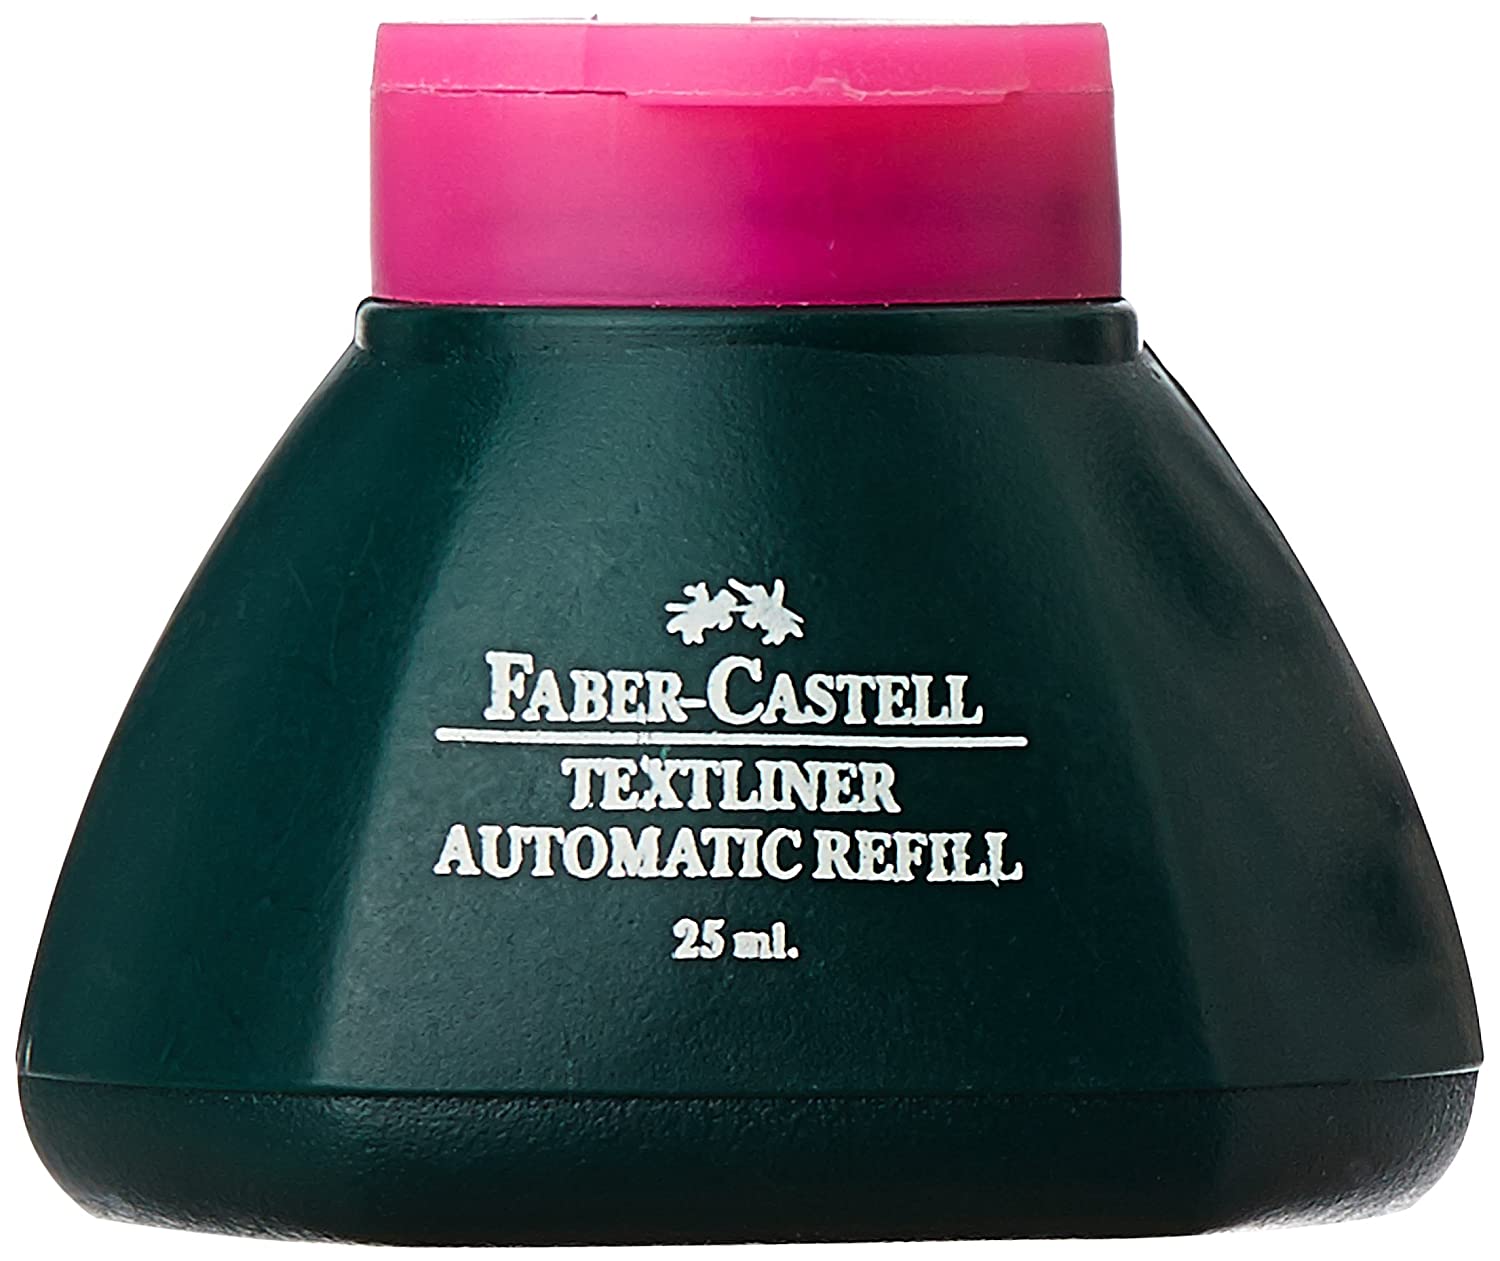 Faber-Castell Textliner Refill Ink 25ml Pink Pack of 150